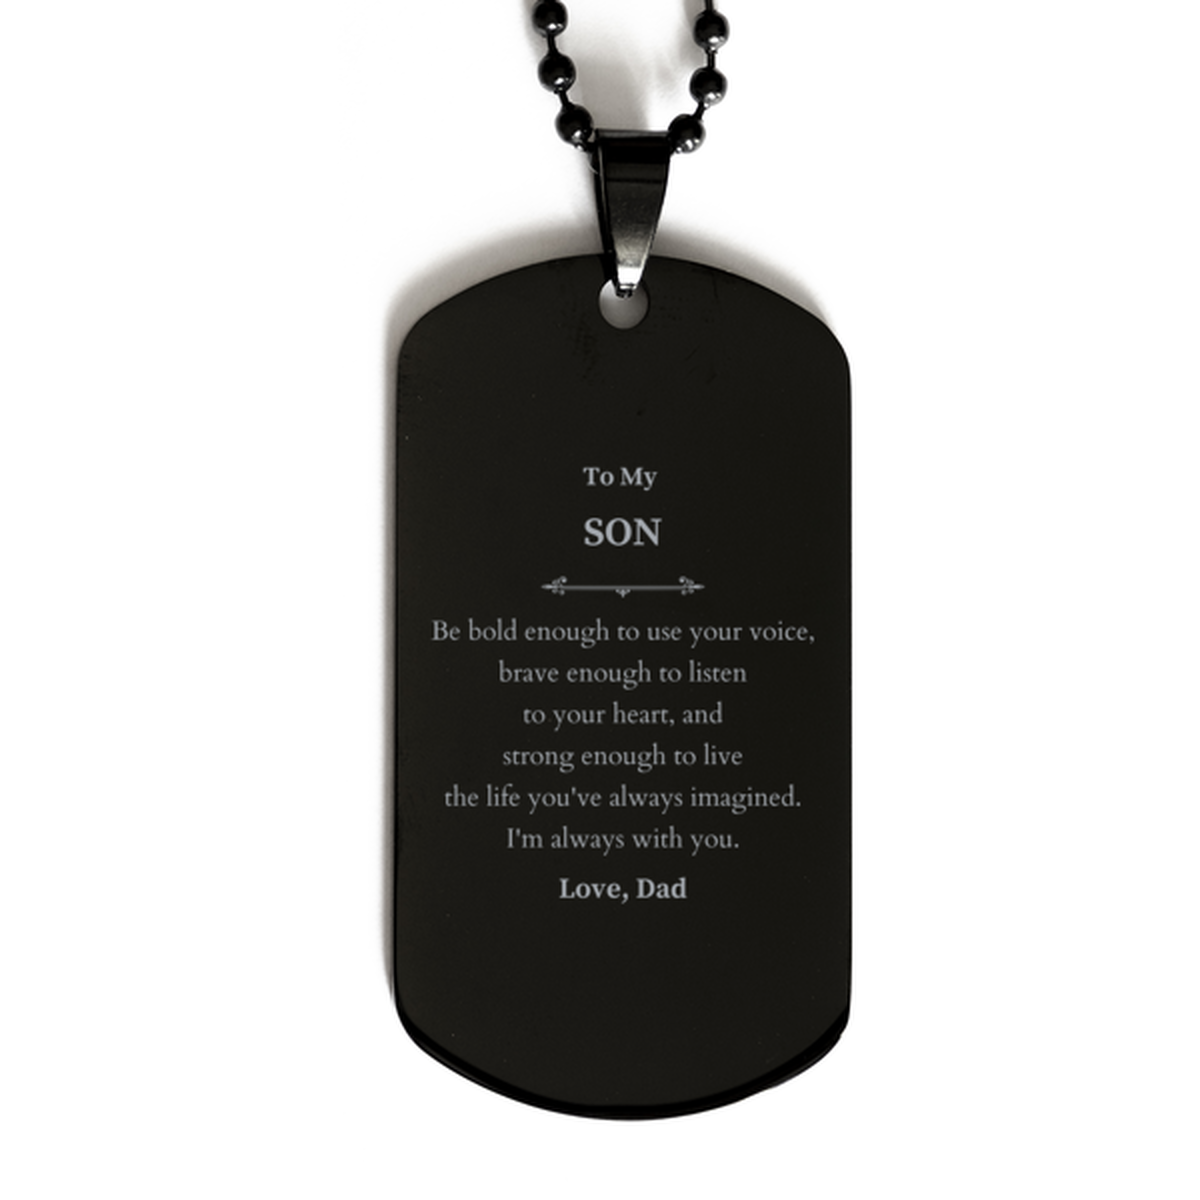 Keepsake Son Black Dog Tag Gift Idea Graduation Christmas Birthday Son from Dad, Son Be bold enough to use your voice, brave enough to listen to your heart. Love, Dad